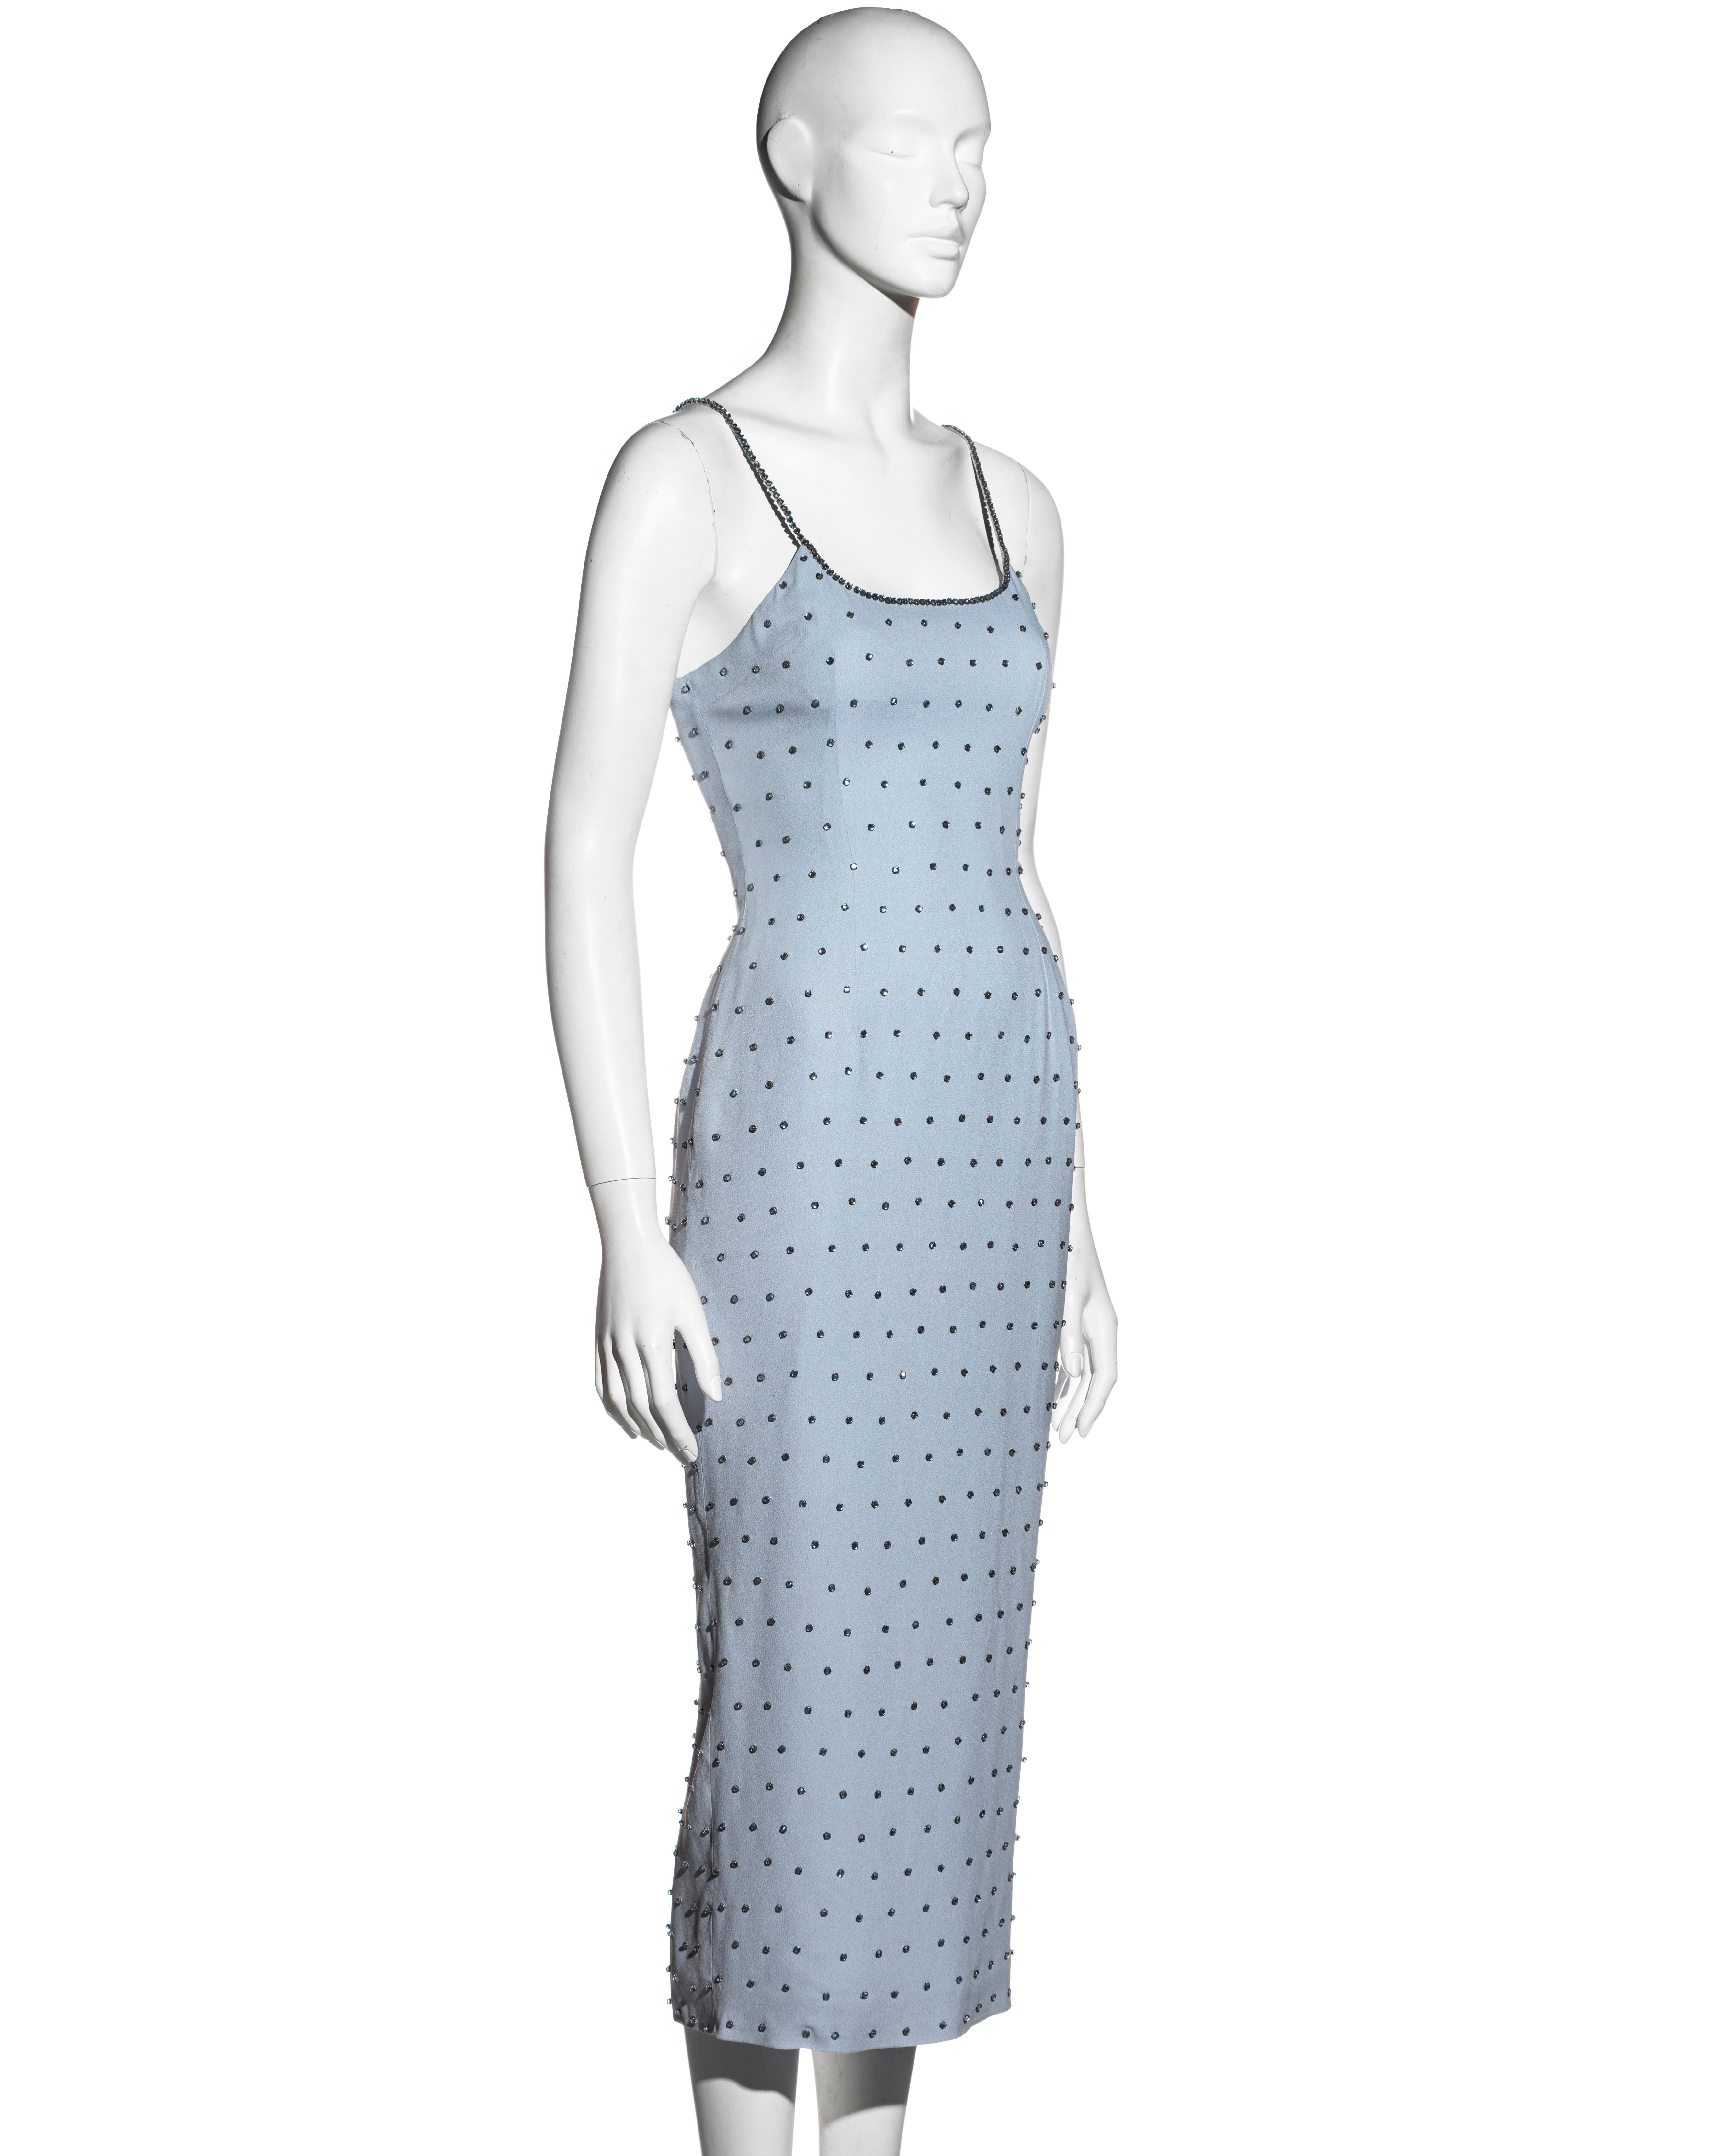 Dolce & Gabbana powder blue crepe evening dress adorned with crystals, ss 1995 1